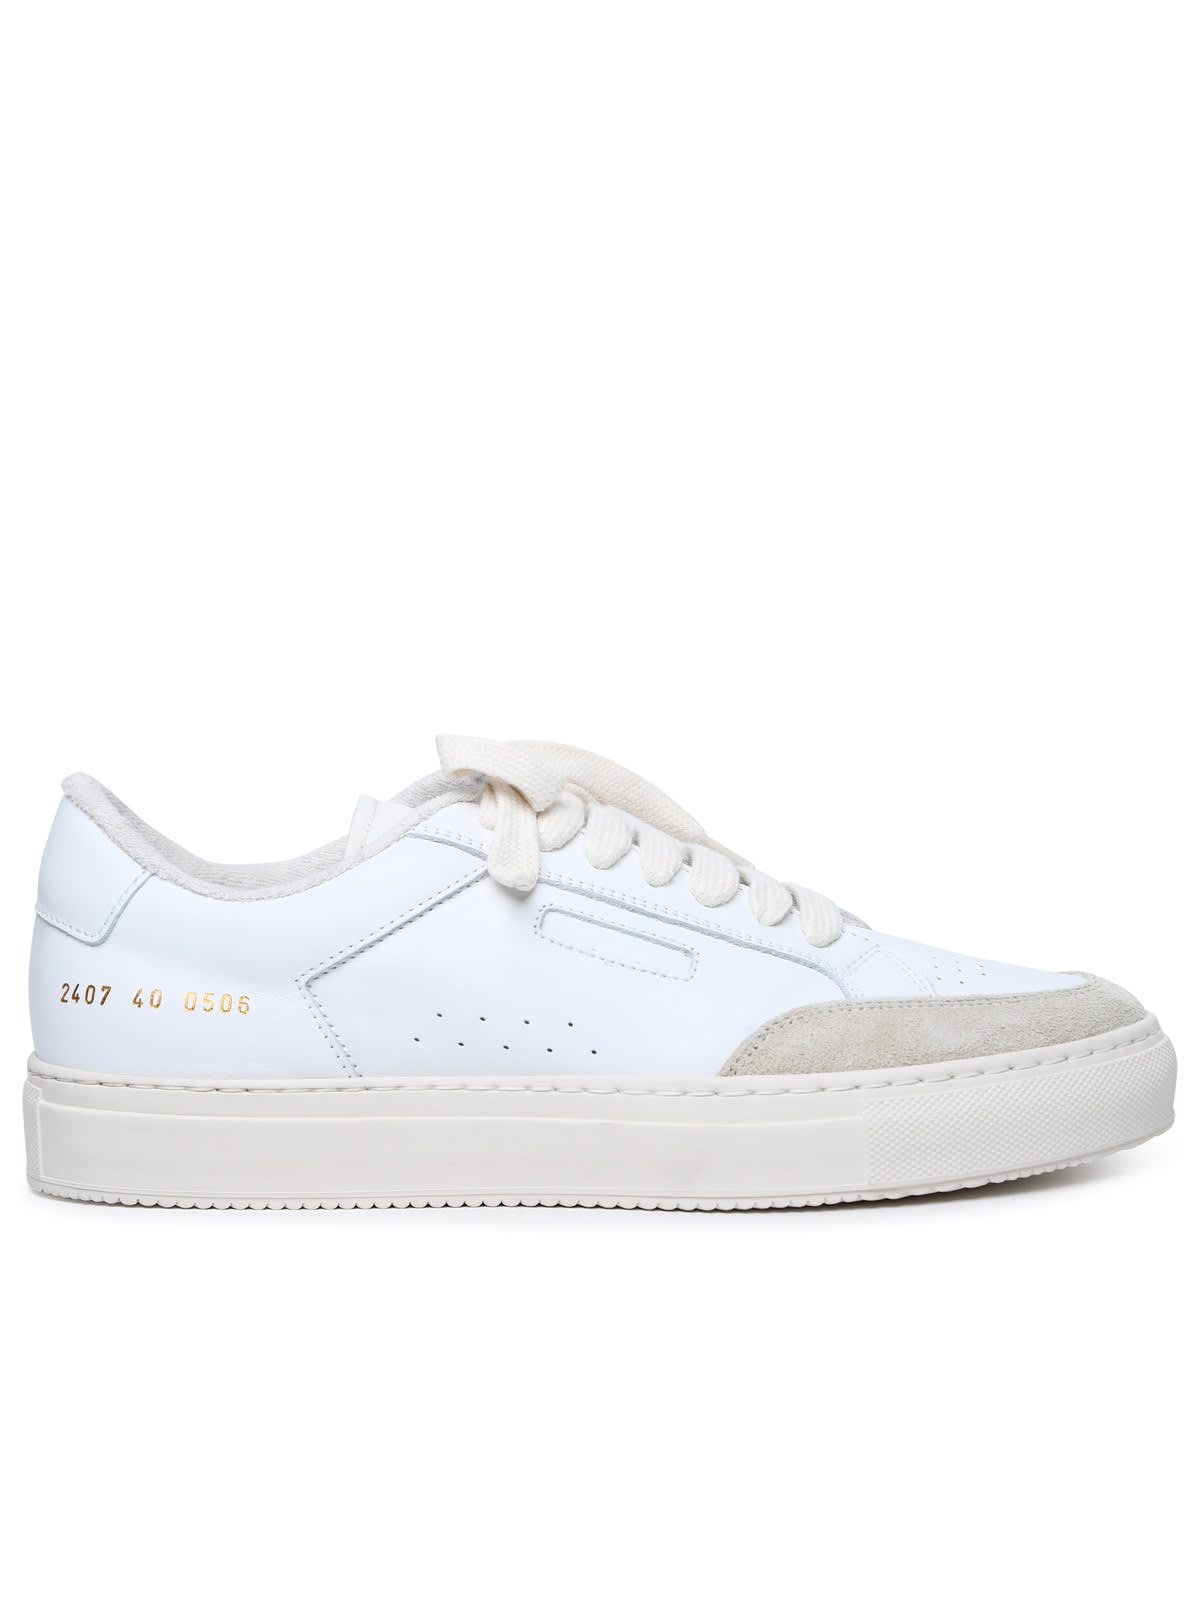 Shop Common Projects Tennis Pro White Leather Sneakers